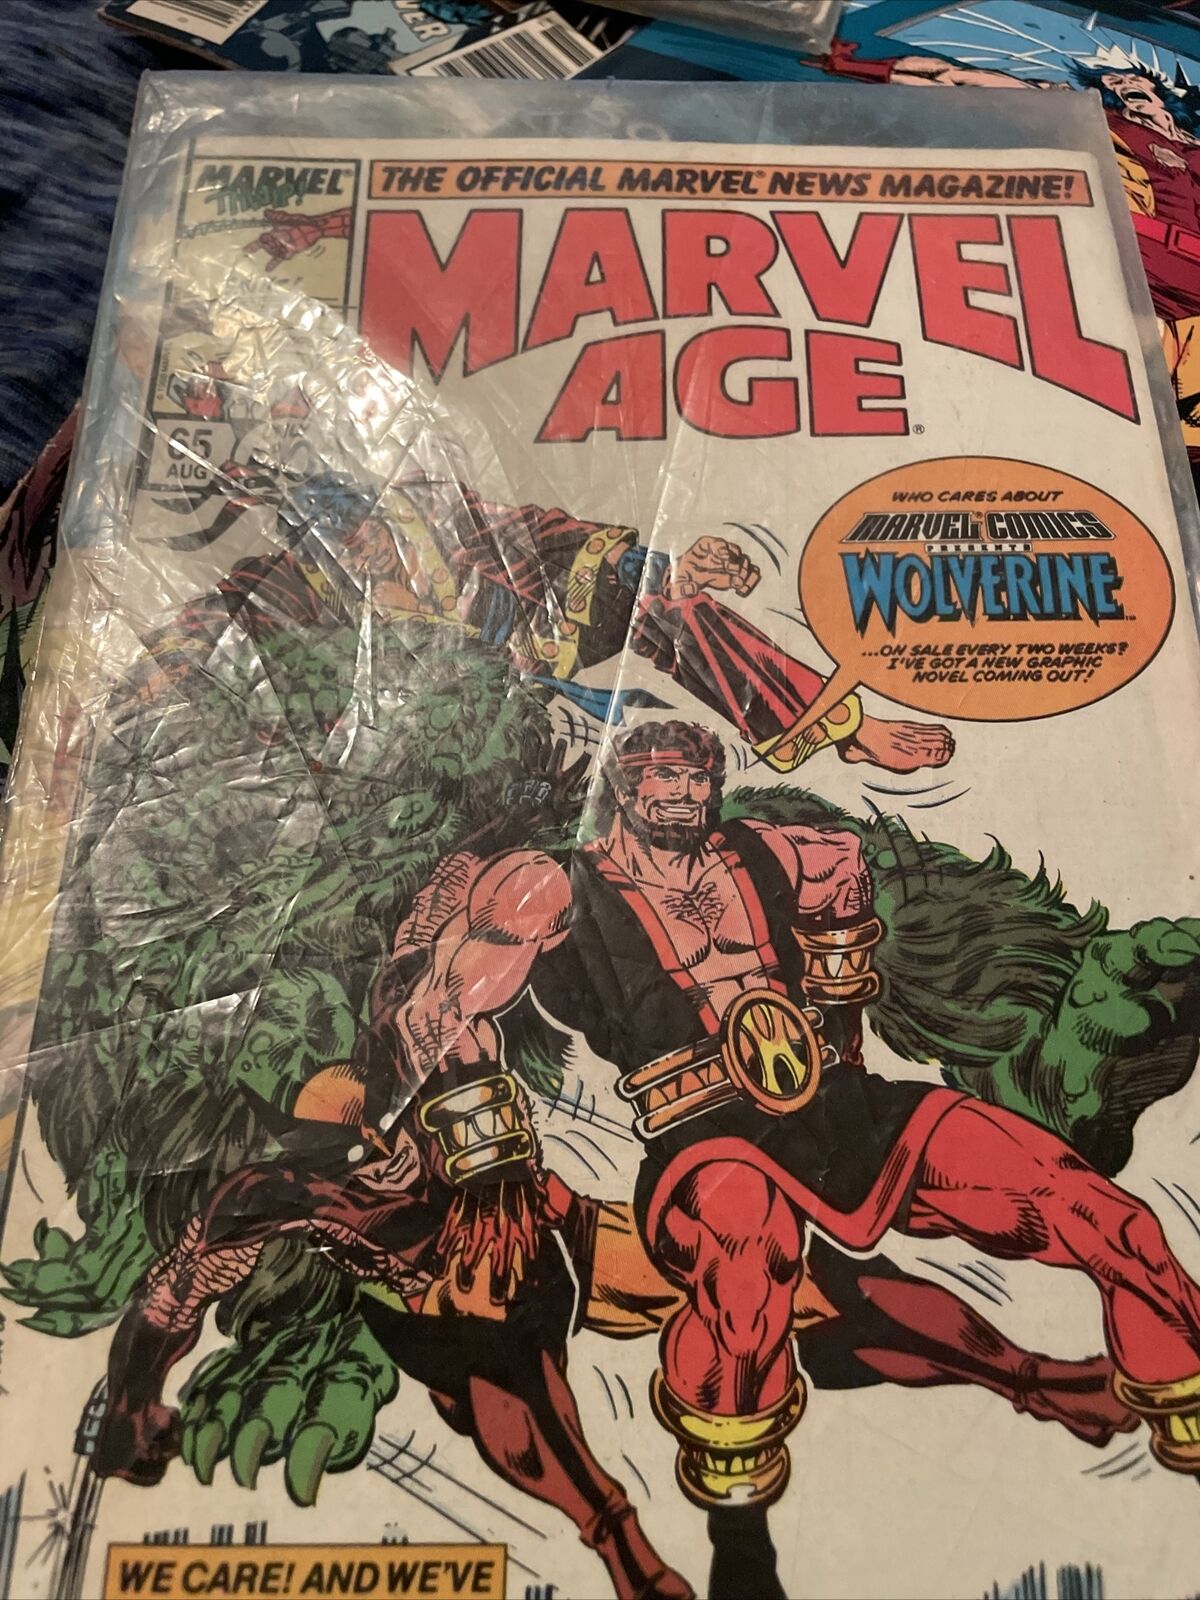 Marvel Age  #65 (August 1988) Comic Book--Wolverine, Hercules, The Thing